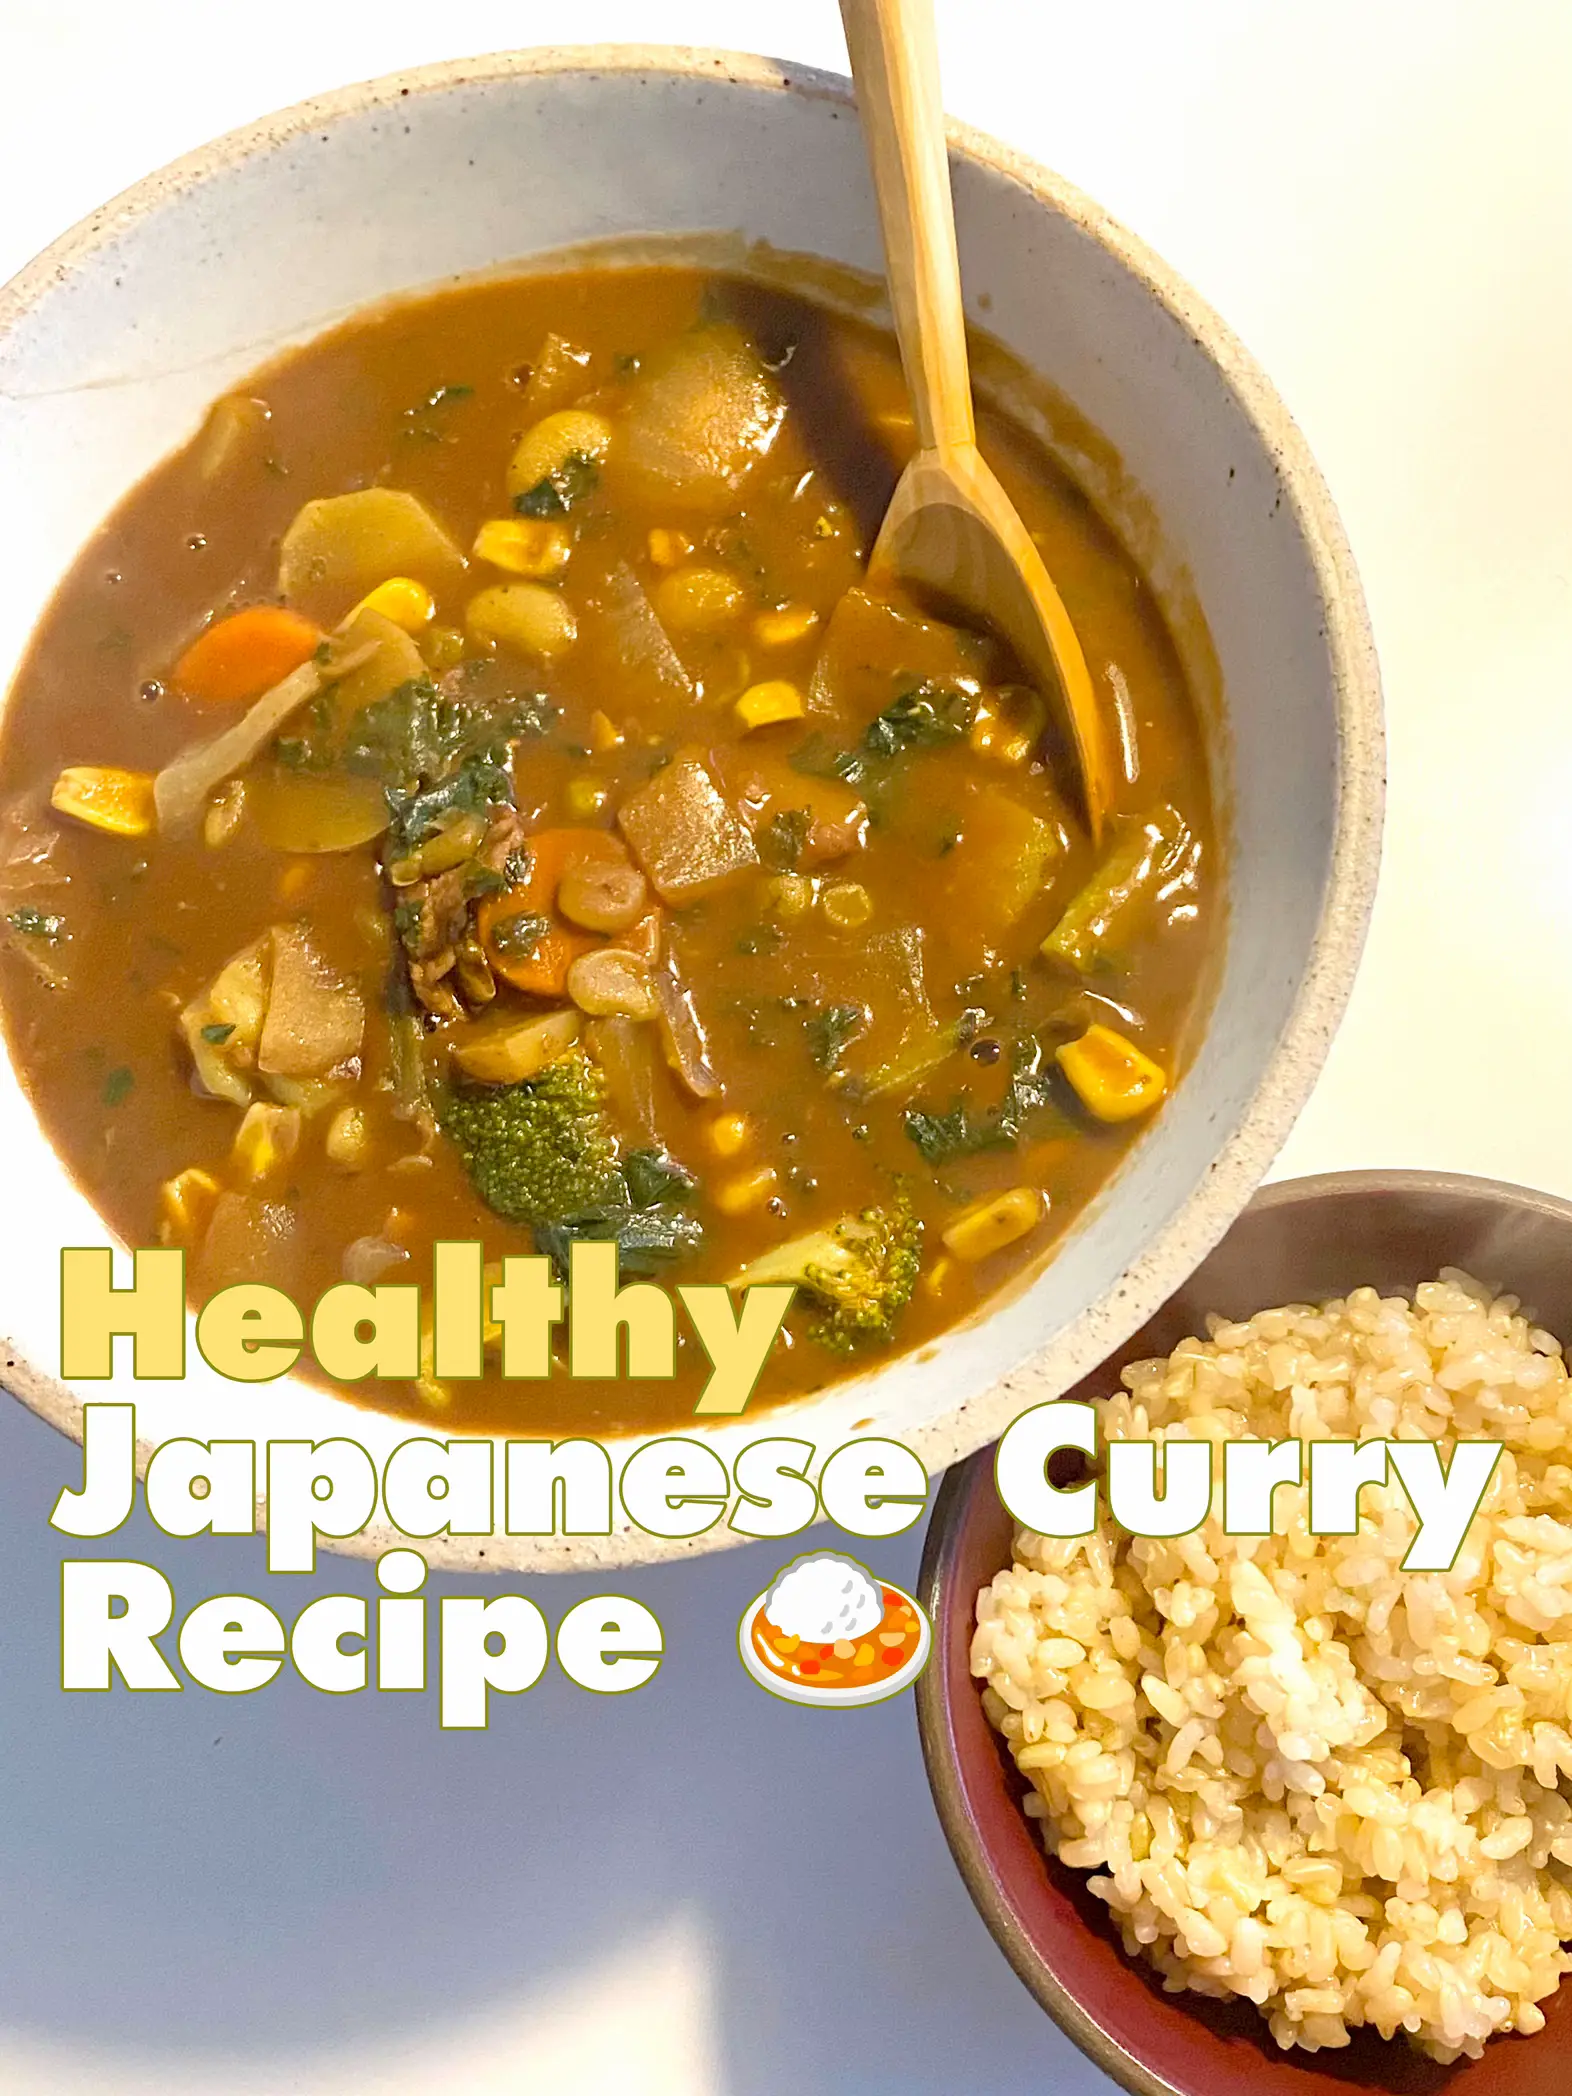 Beef Curry Using S&B Golden Curry Mix - The Peach Kitchen